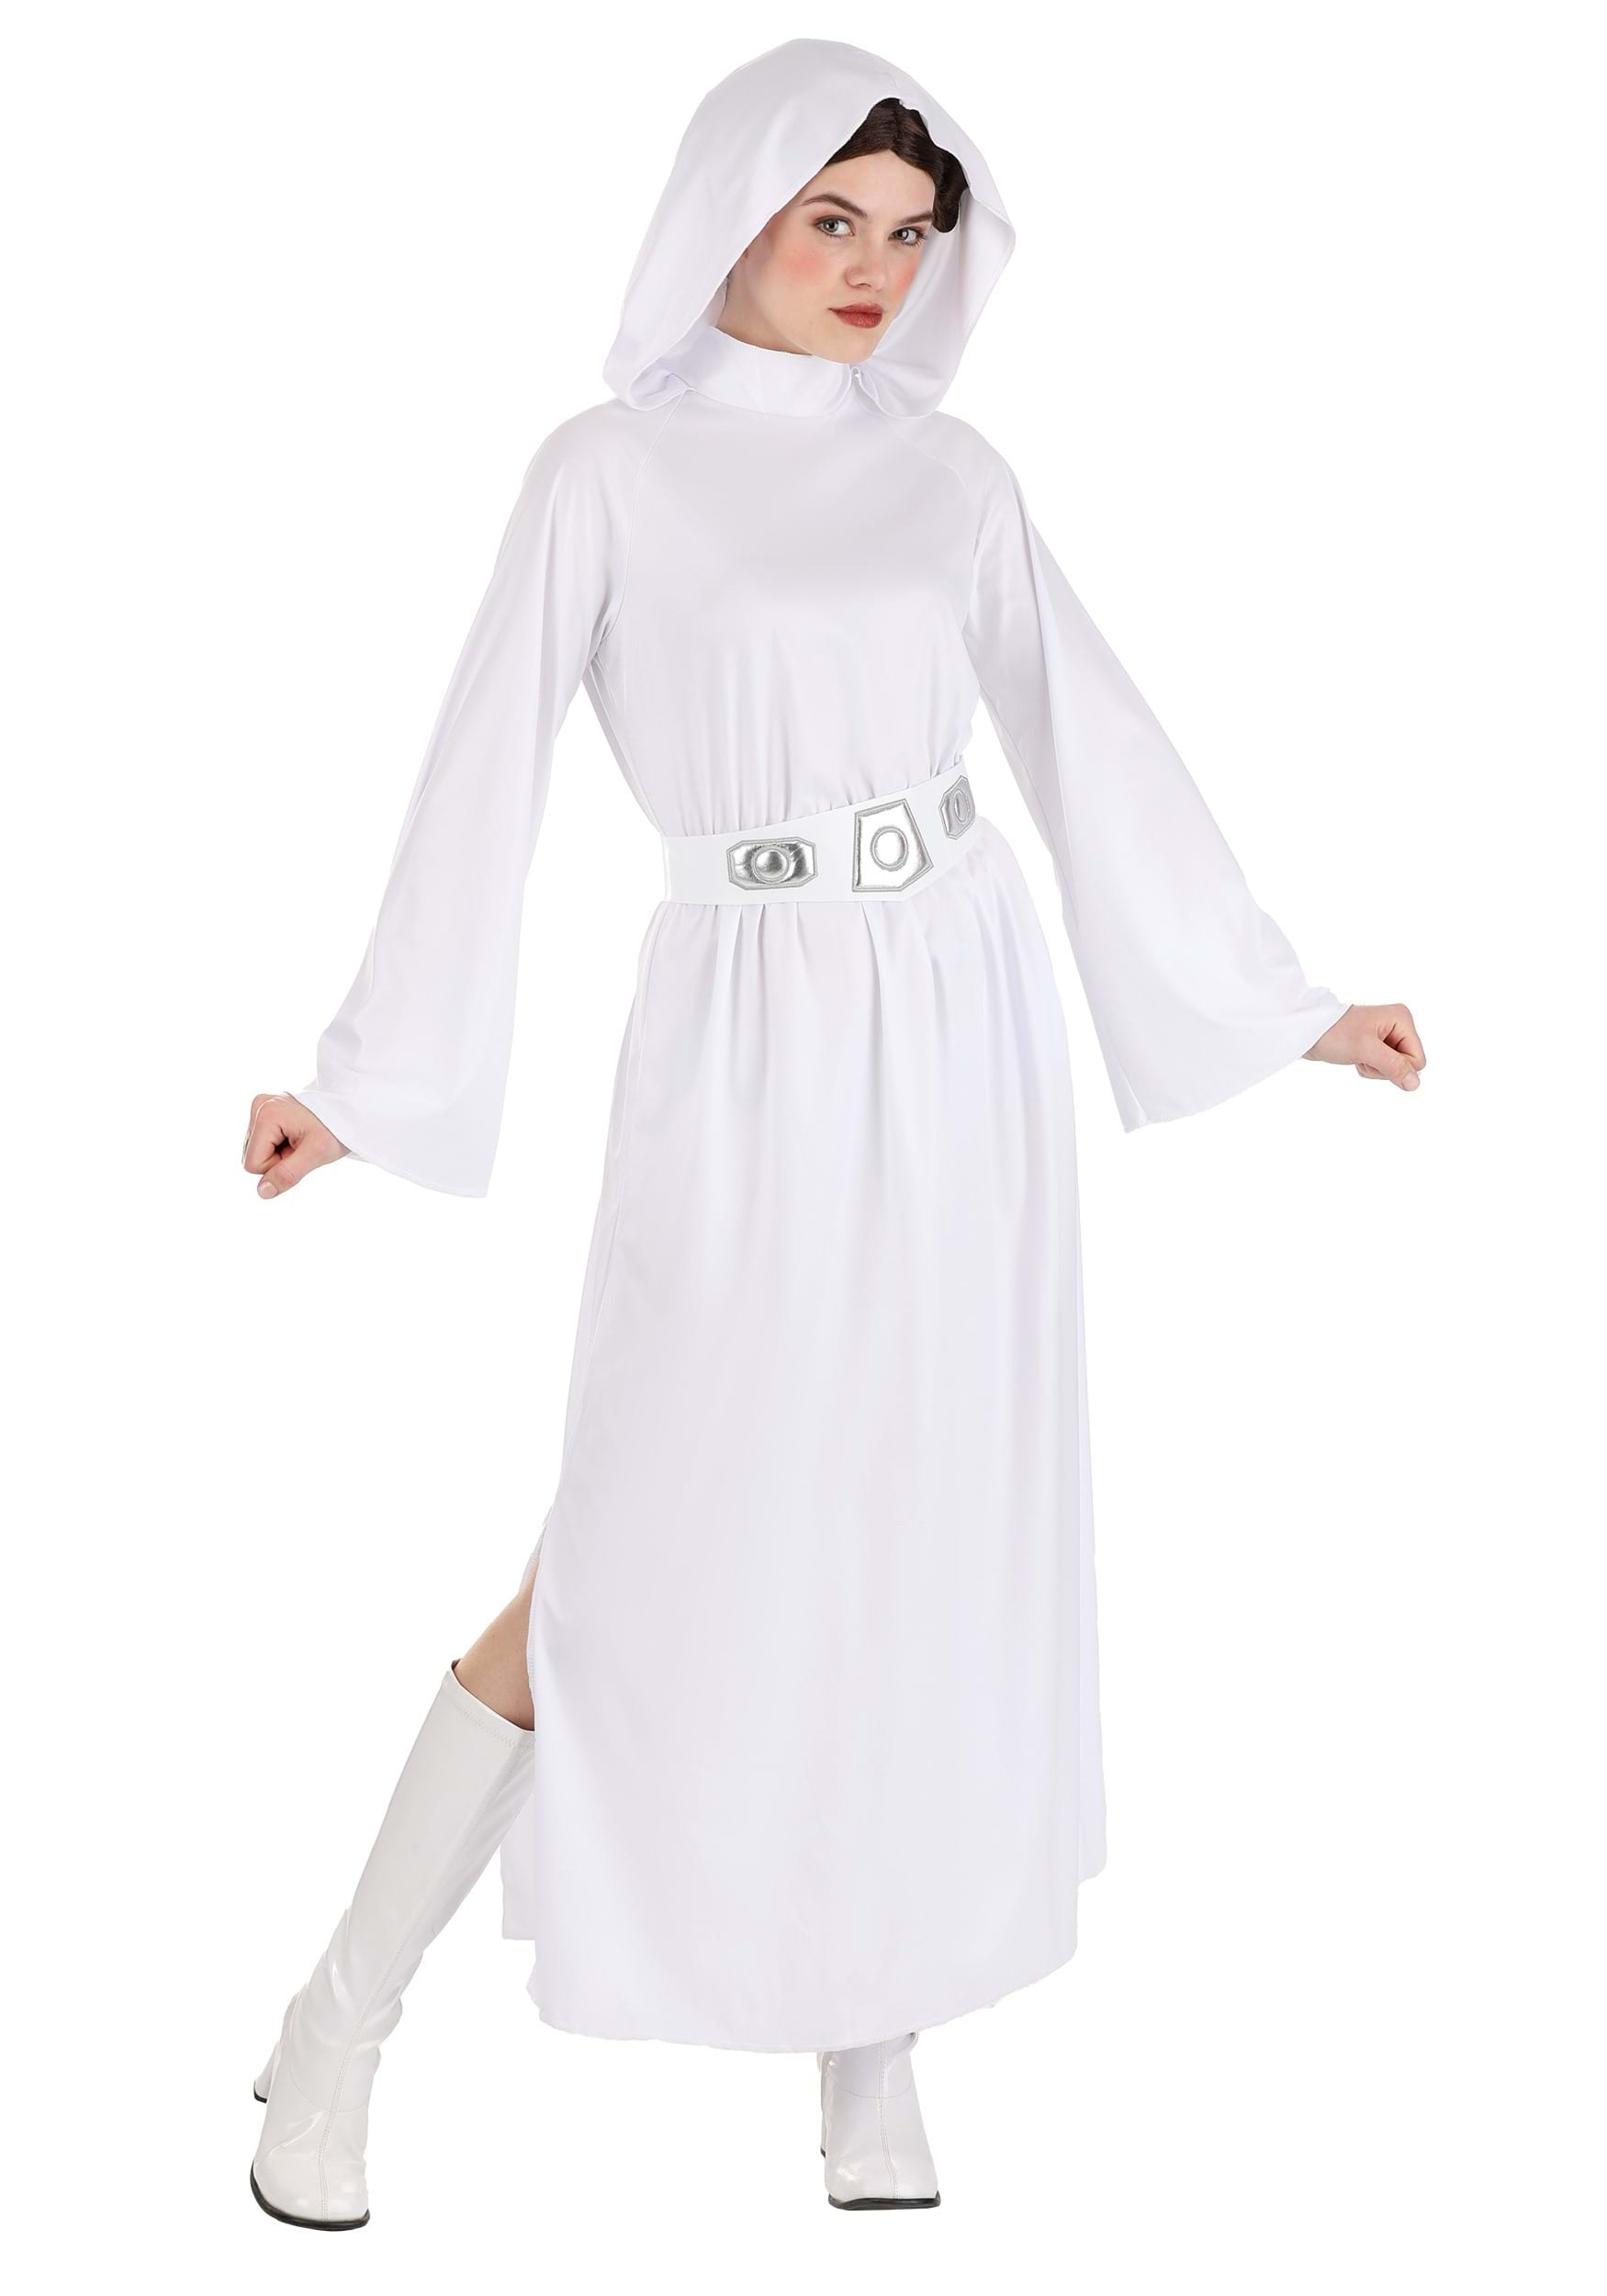 Princess Leia Hooded Costume for Adults